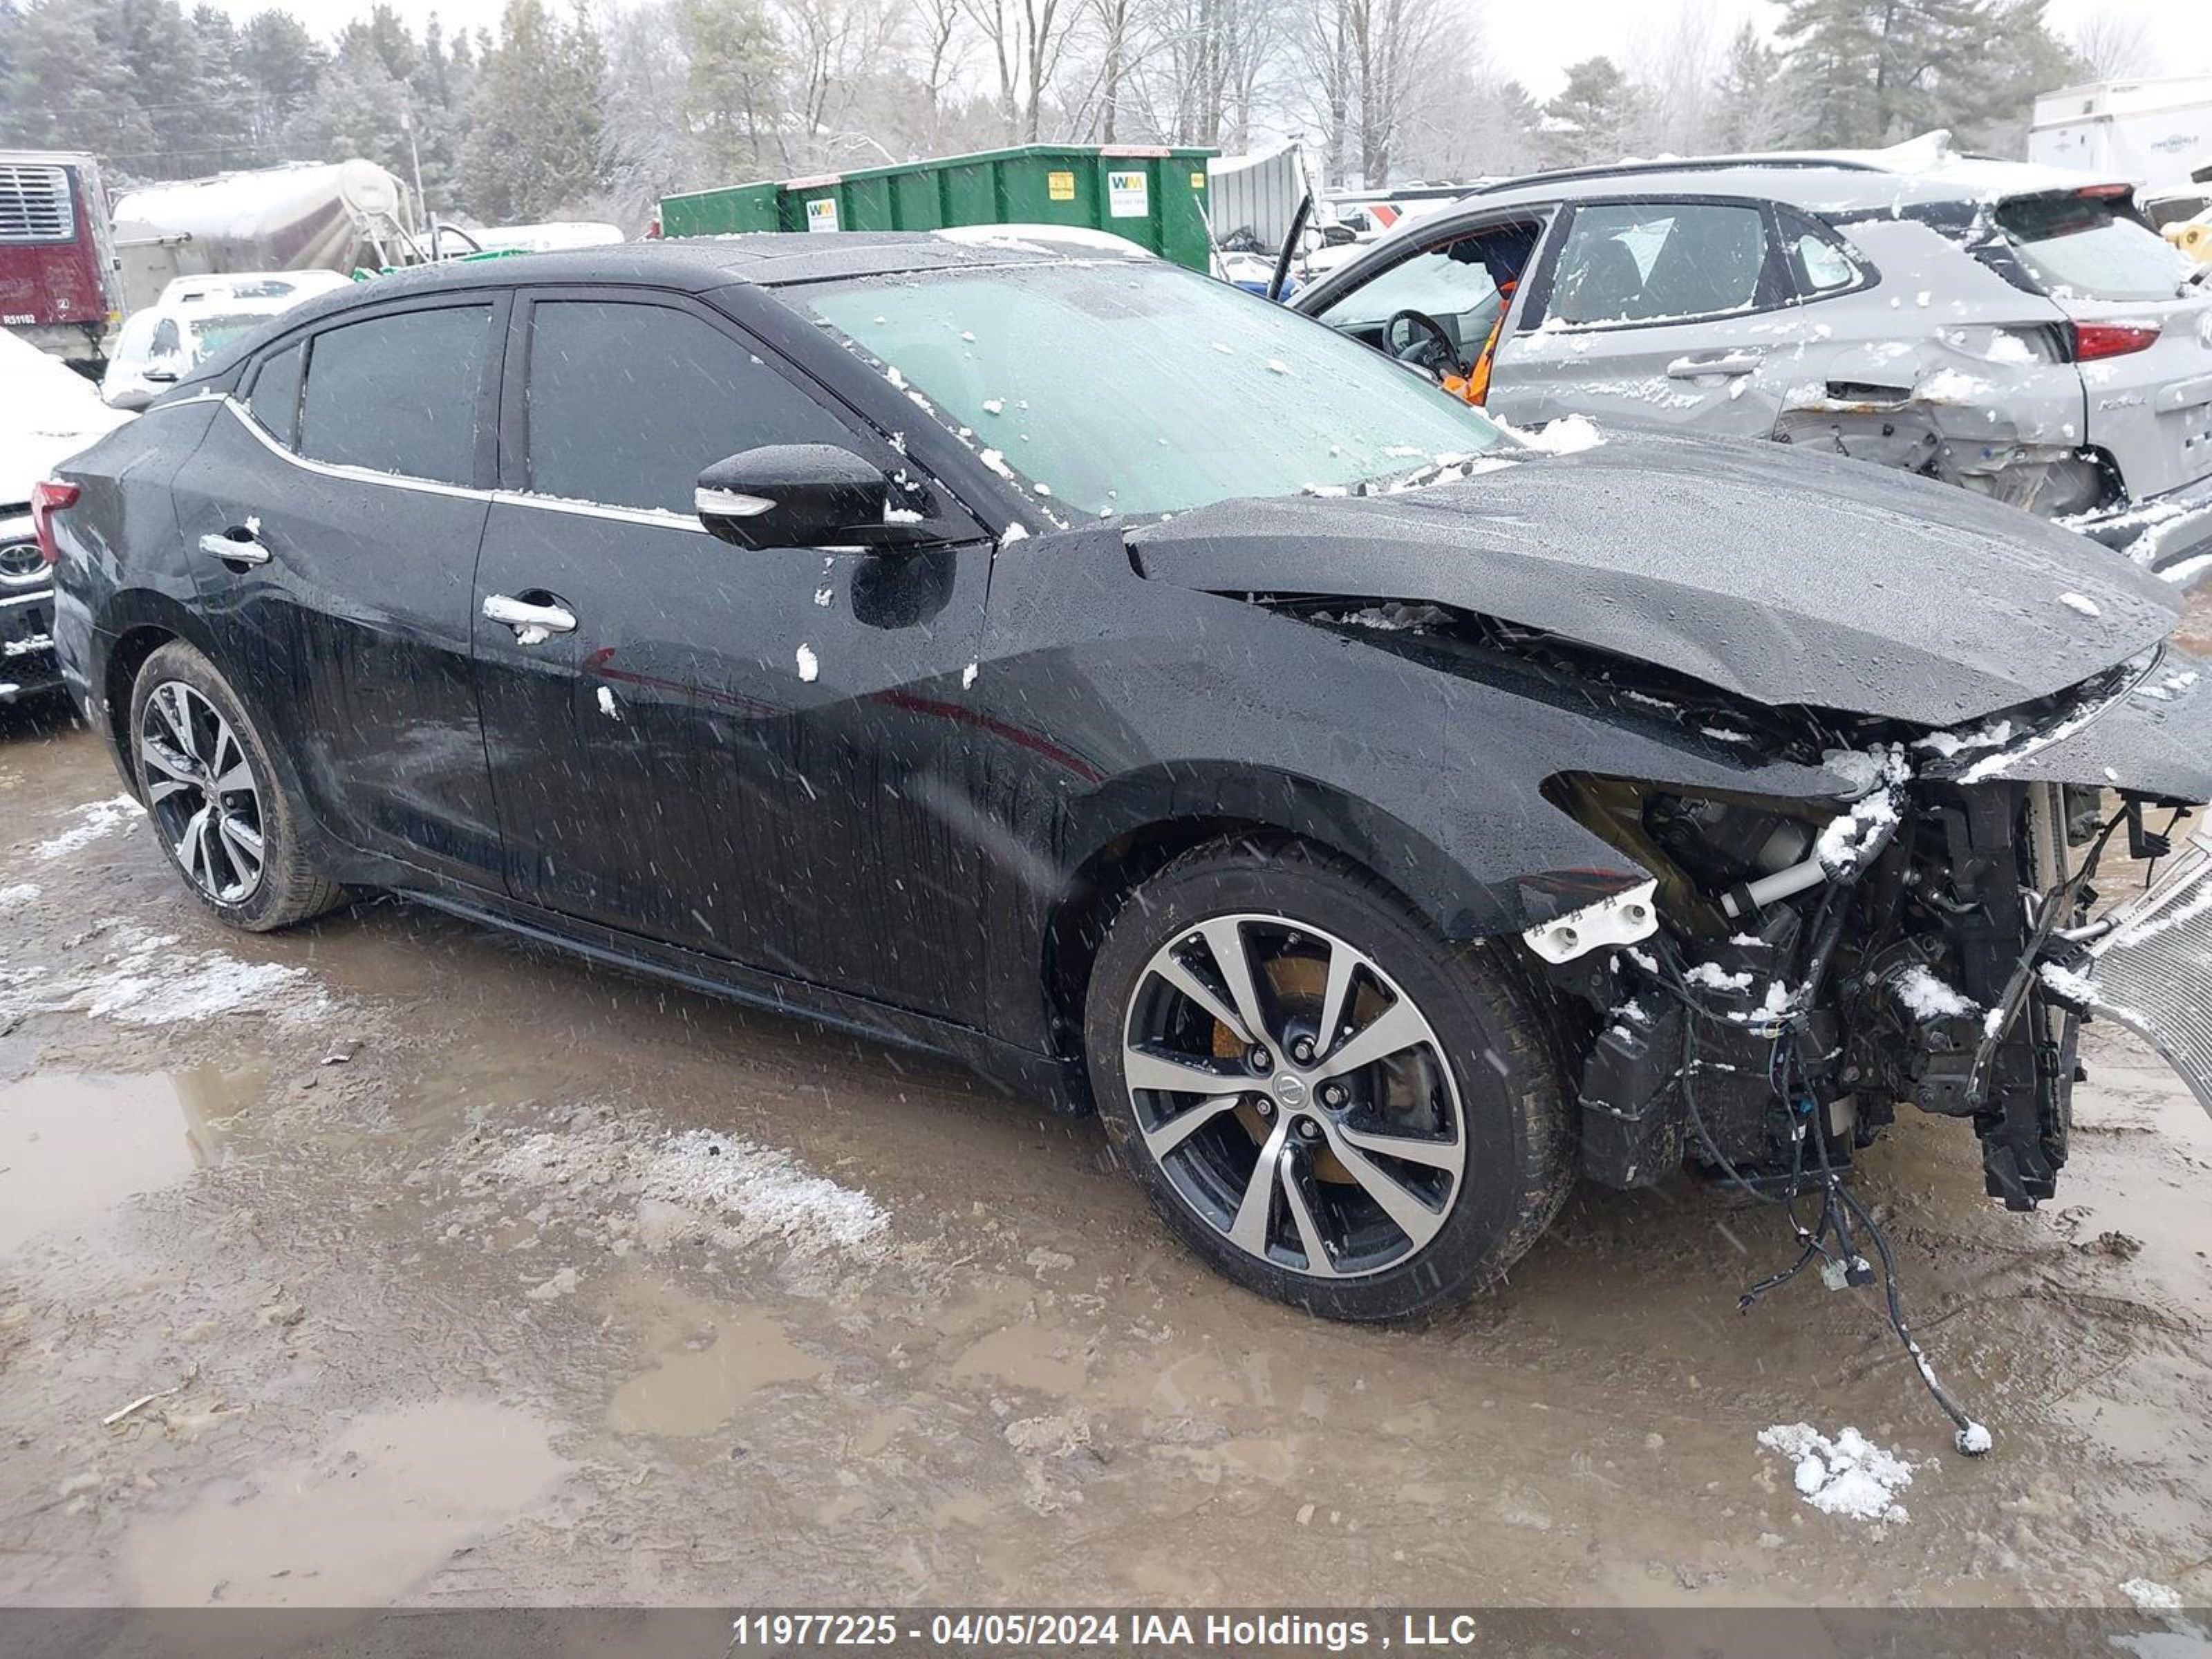 vin: 1N4AA6AP2HC400111 1N4AA6AP2HC400111 2017 nissan maxima 3500 for Sale in l4a7x4, 16505 Hwy 48 , Stouffville, Ontario, Canada